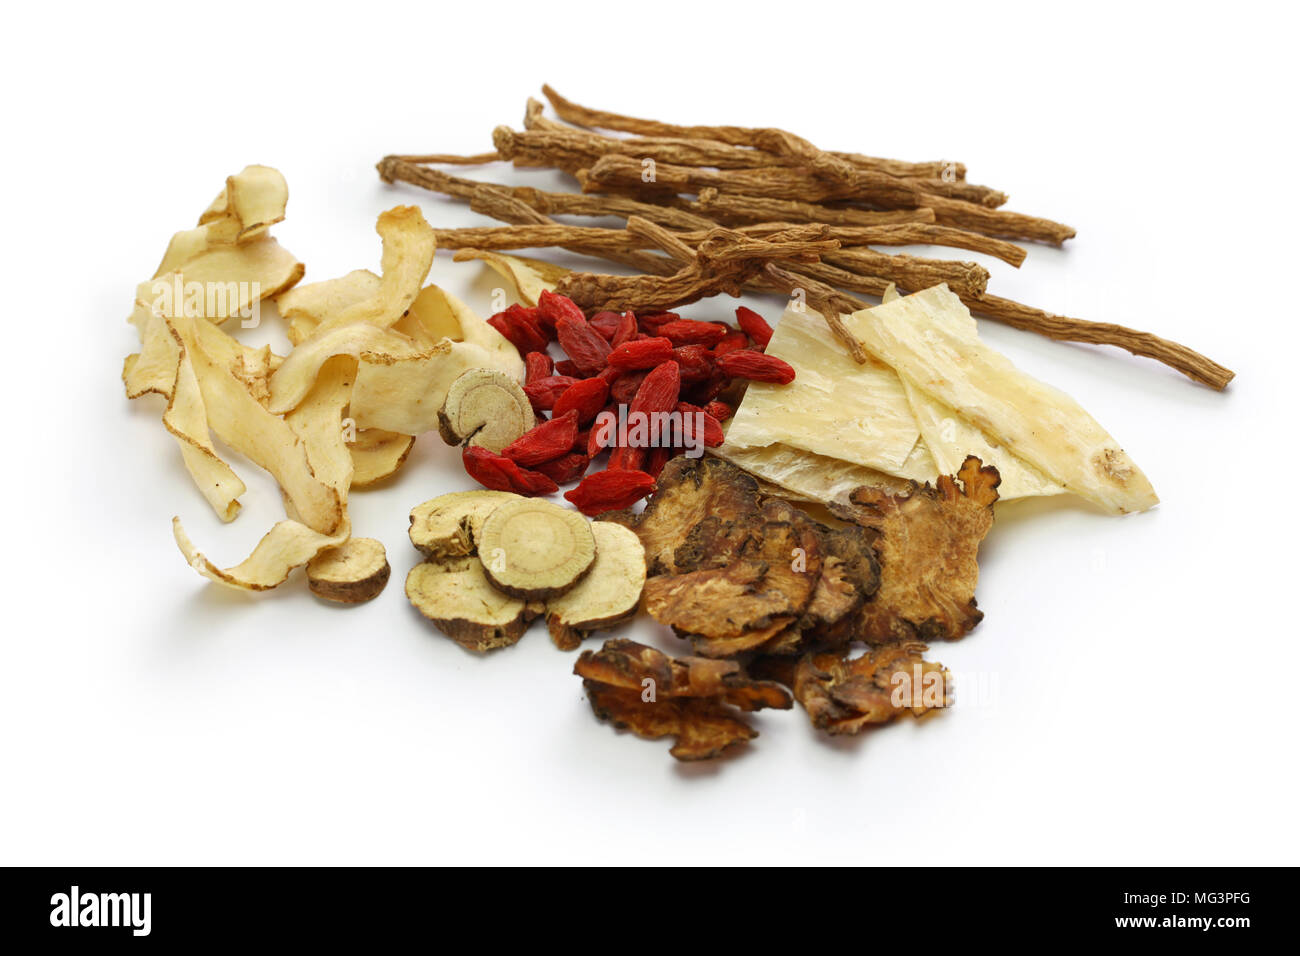 malaysia bak kut teh ingredients, traditional chinese herbal medicine isolated on white background Stock Photo